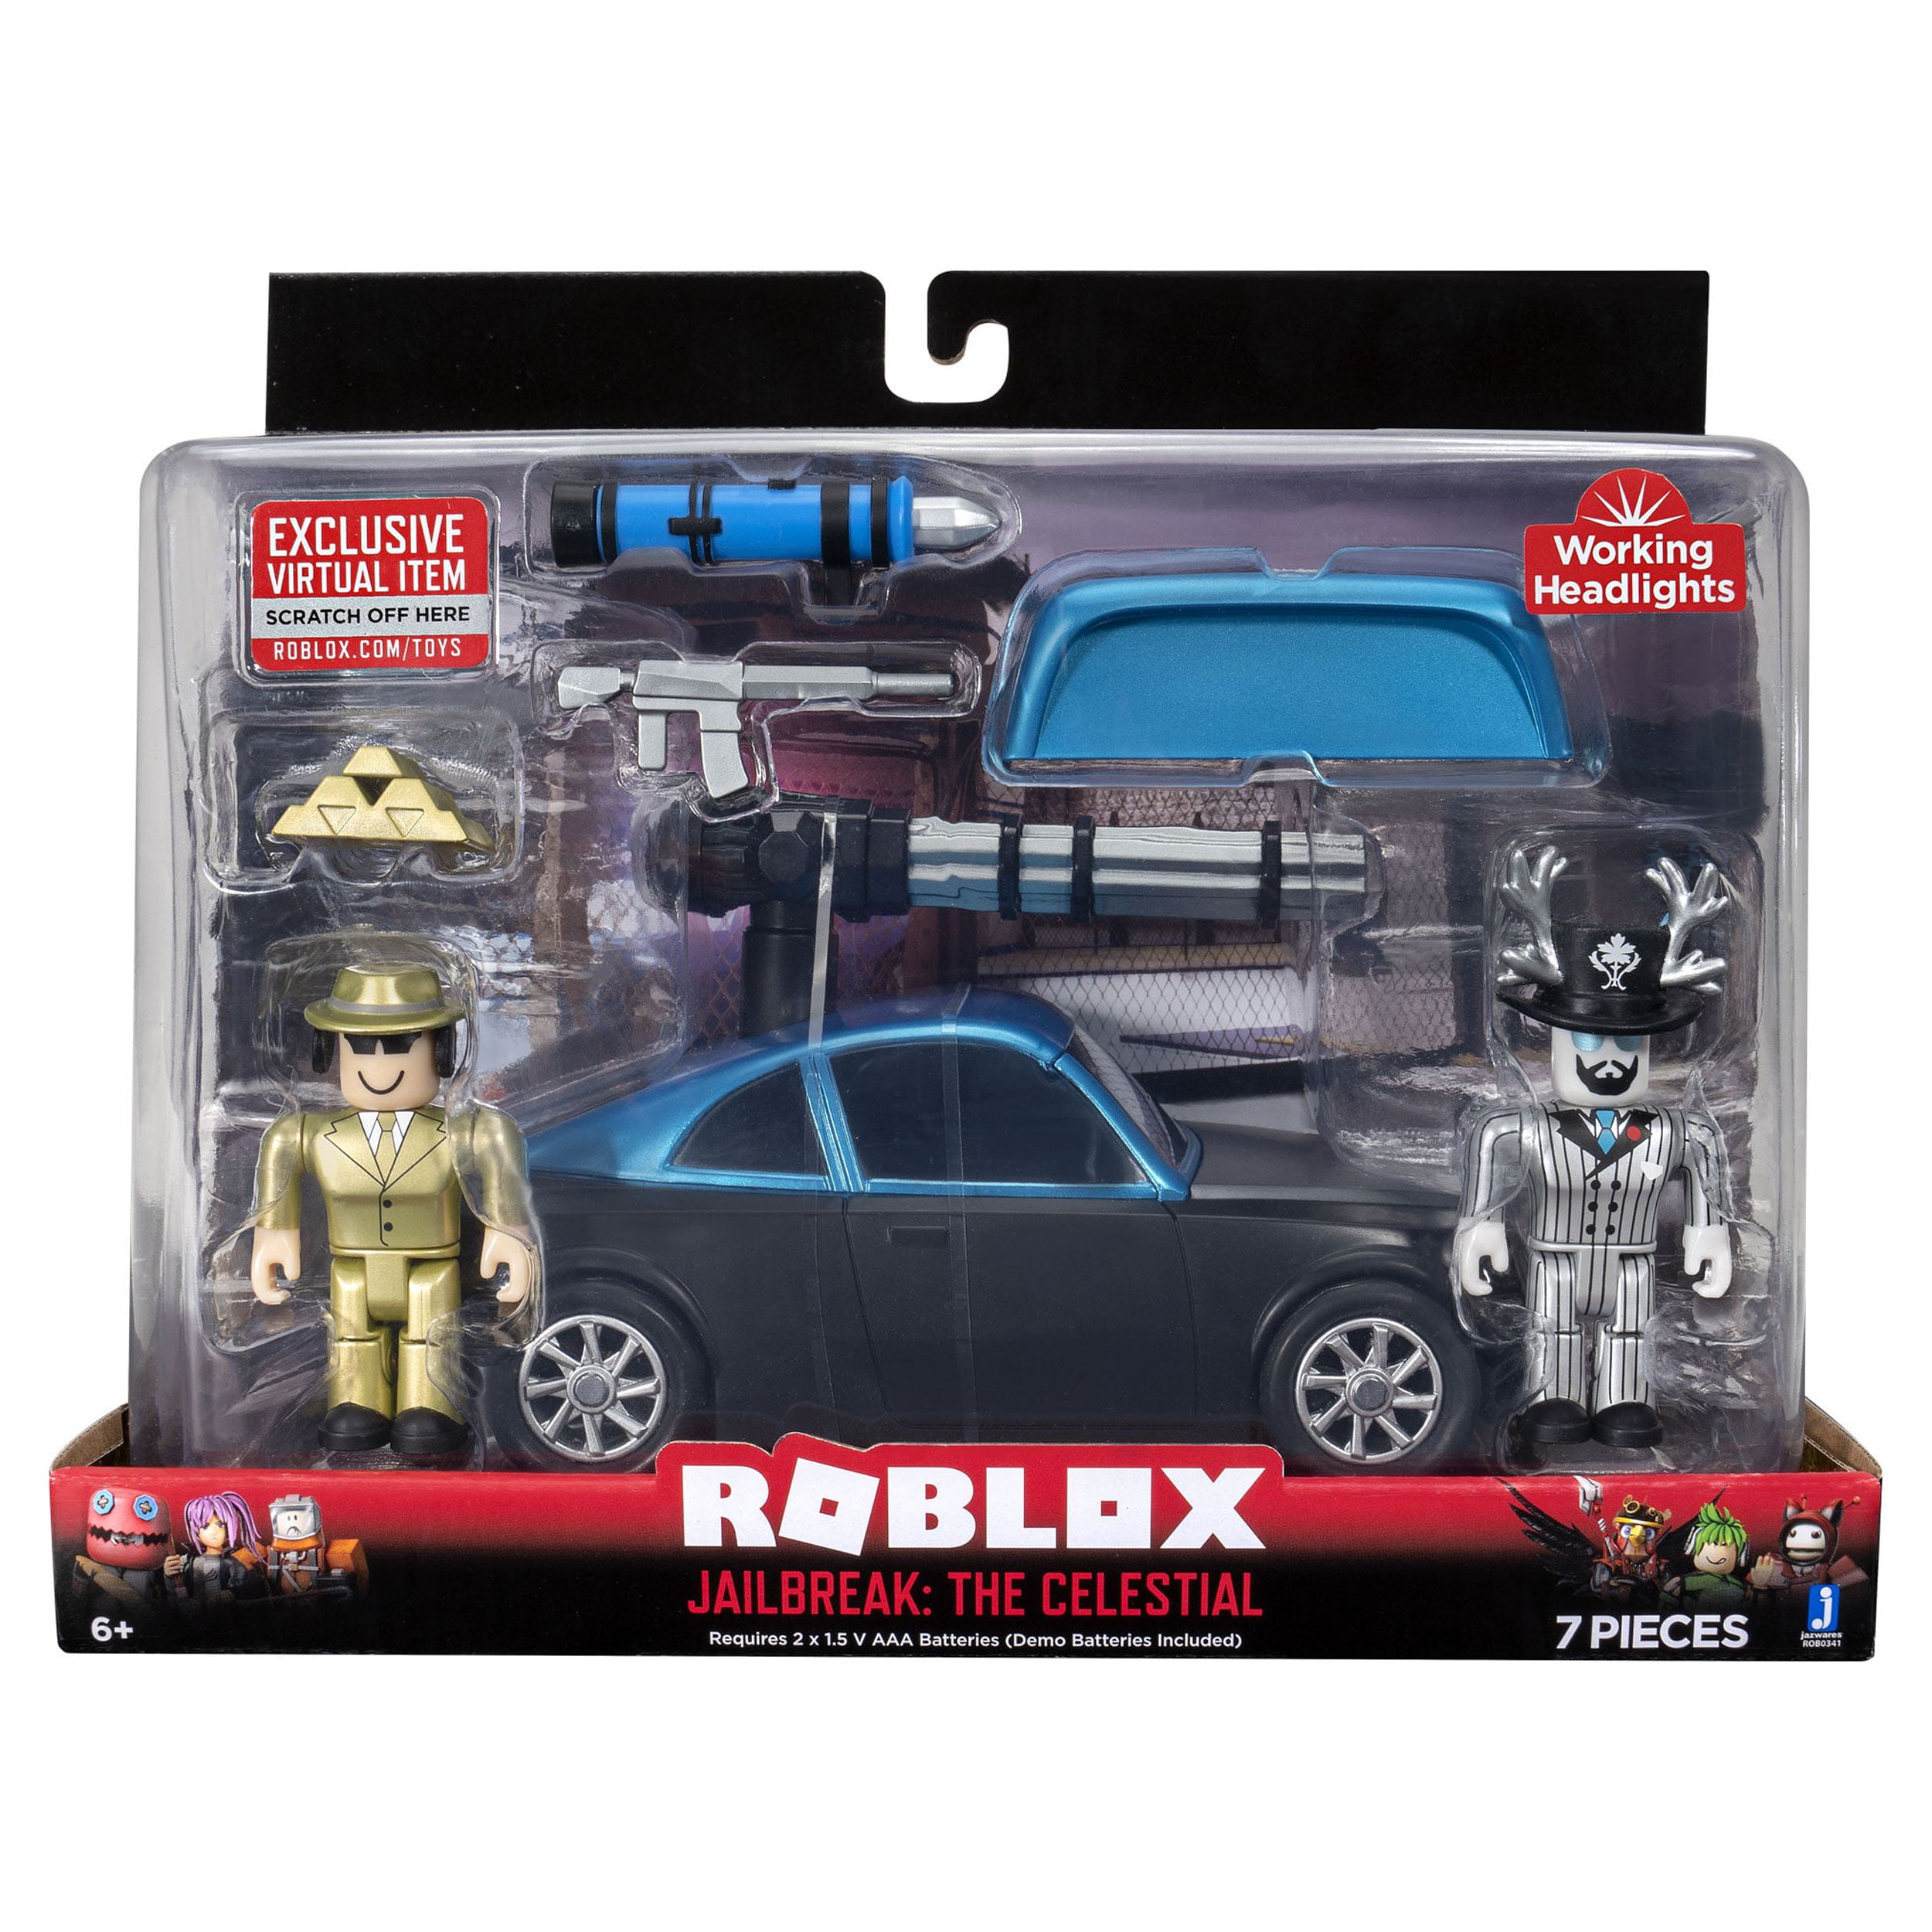 Roblox Action Collection - Jailbreak: The Celestial Deluxe Vehicle  [Includes Exclusive Virtual Item] 